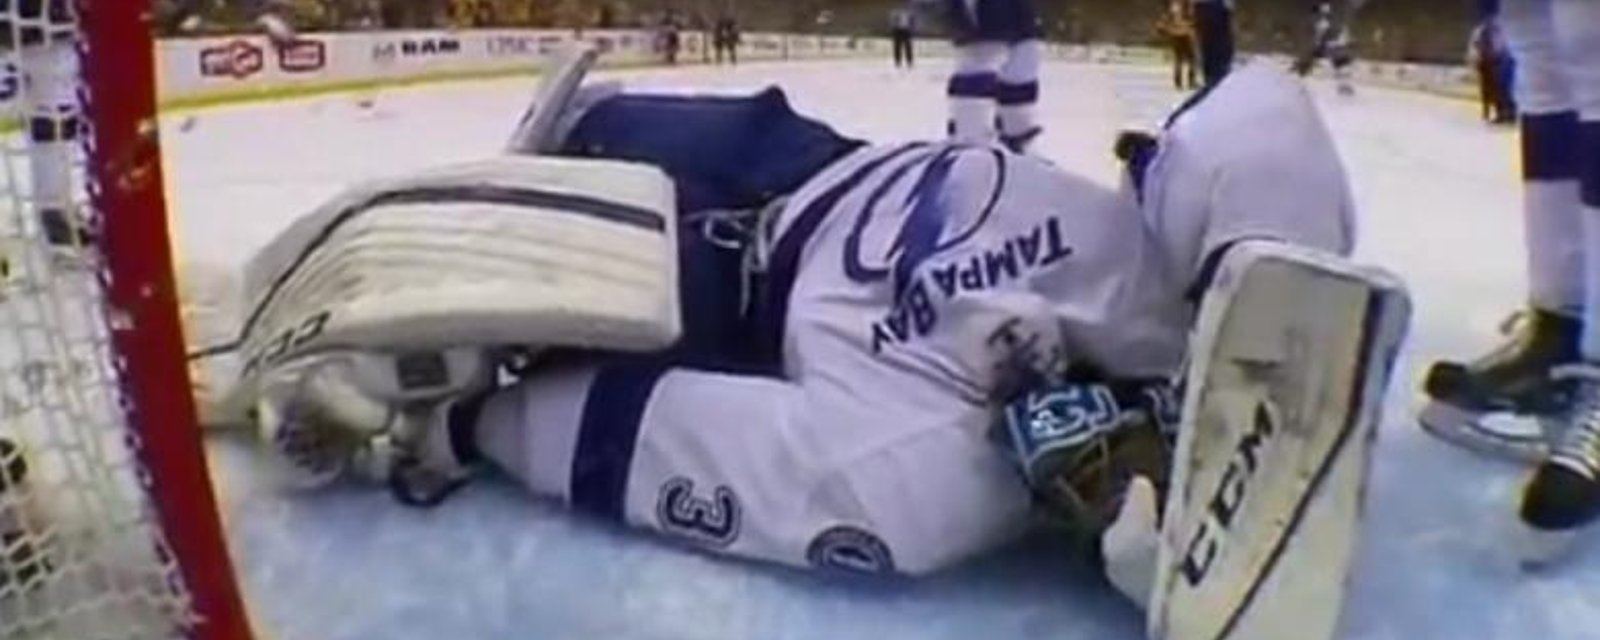 Breaking: Star goaltender injured and carted off on a stretcher in Game 1.